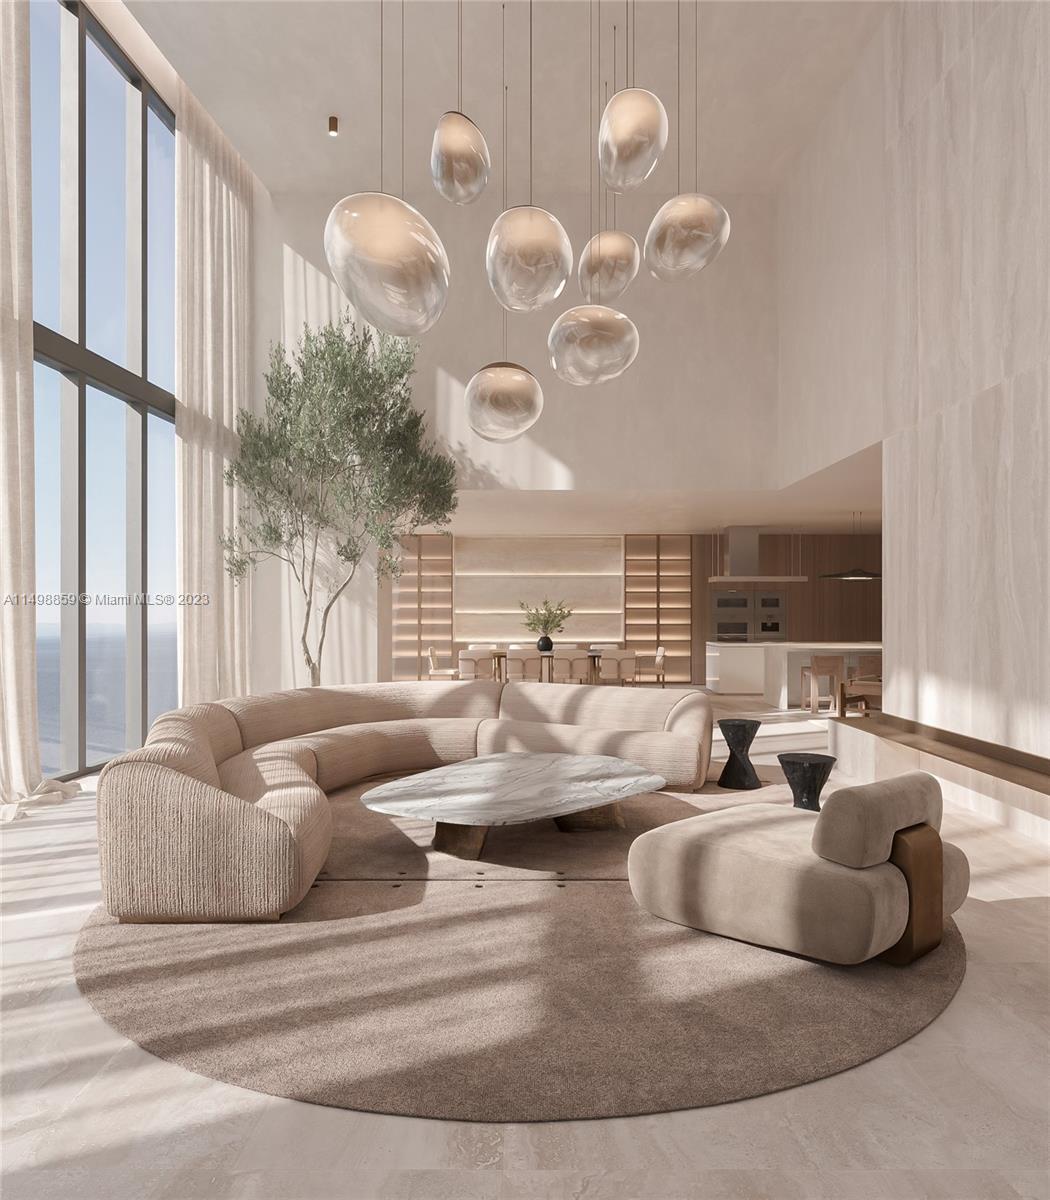 Property for Sale at 18501 Collins Ave 2301, Sunny Isles Beach, Miami-Dade County, Florida - Bedrooms: 5 
Bathrooms: 8  - $27,500,000